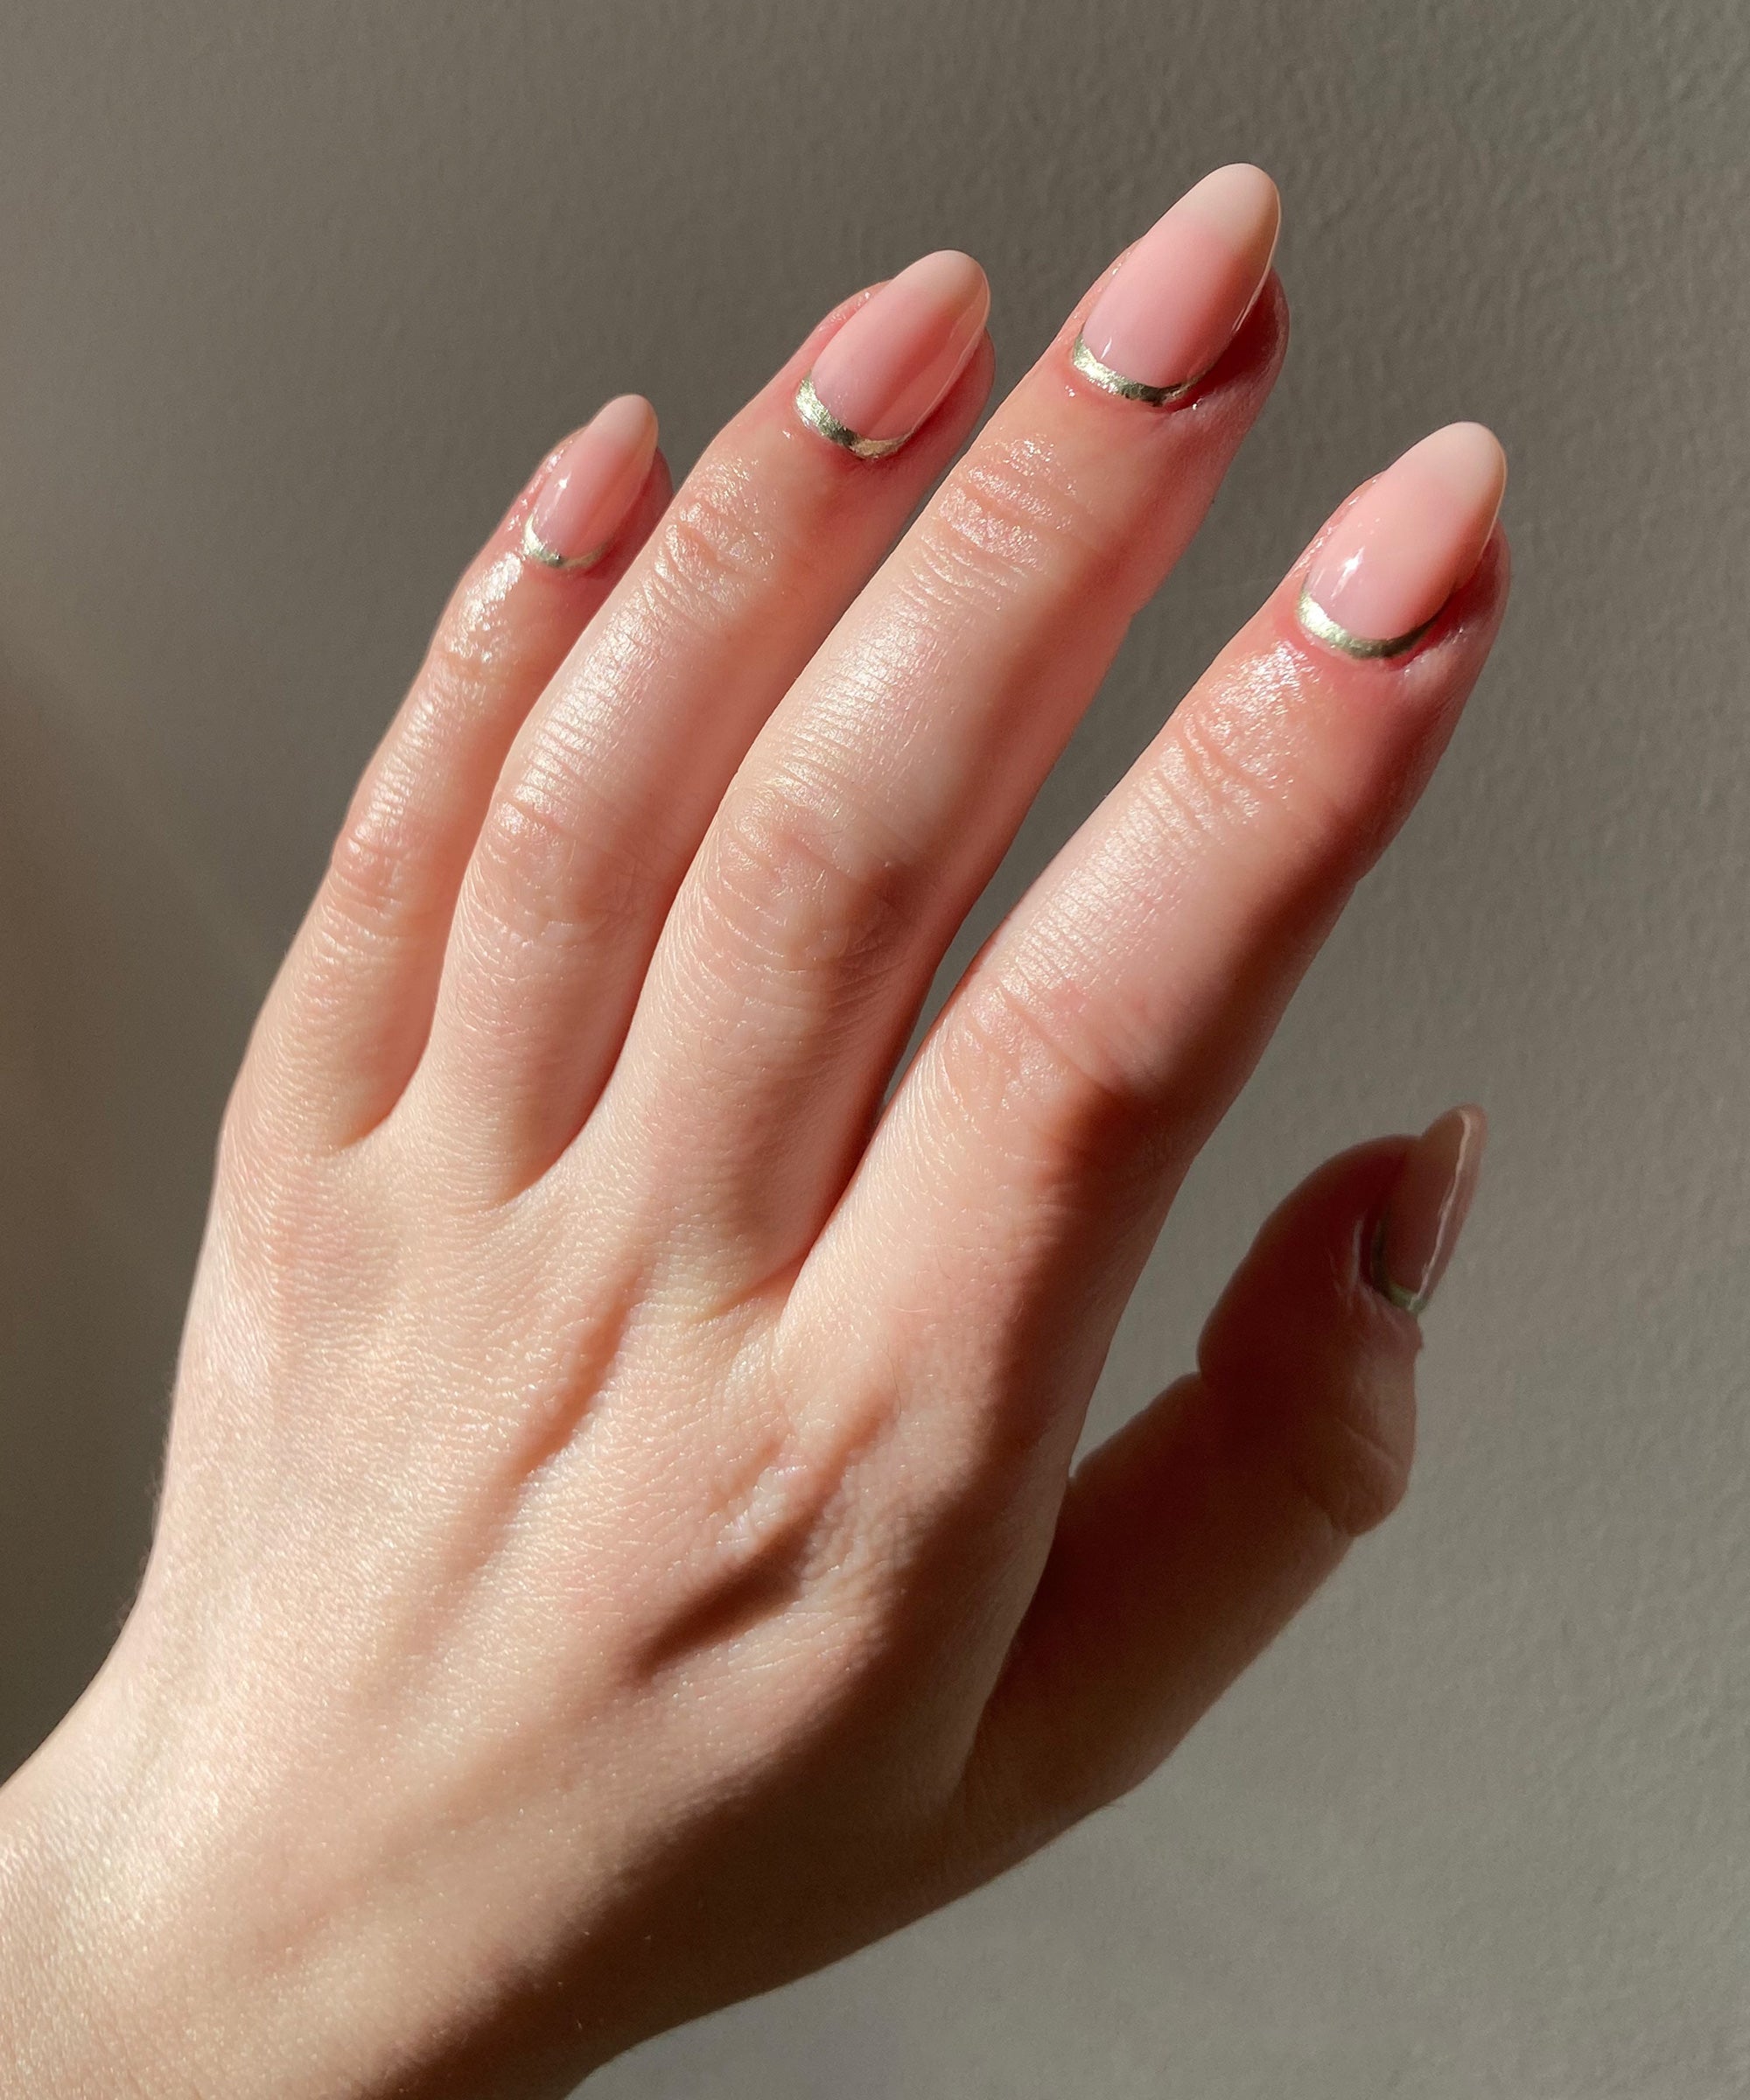 How To Achieve The 'Clean Girl' Nail Aesthetic At Home